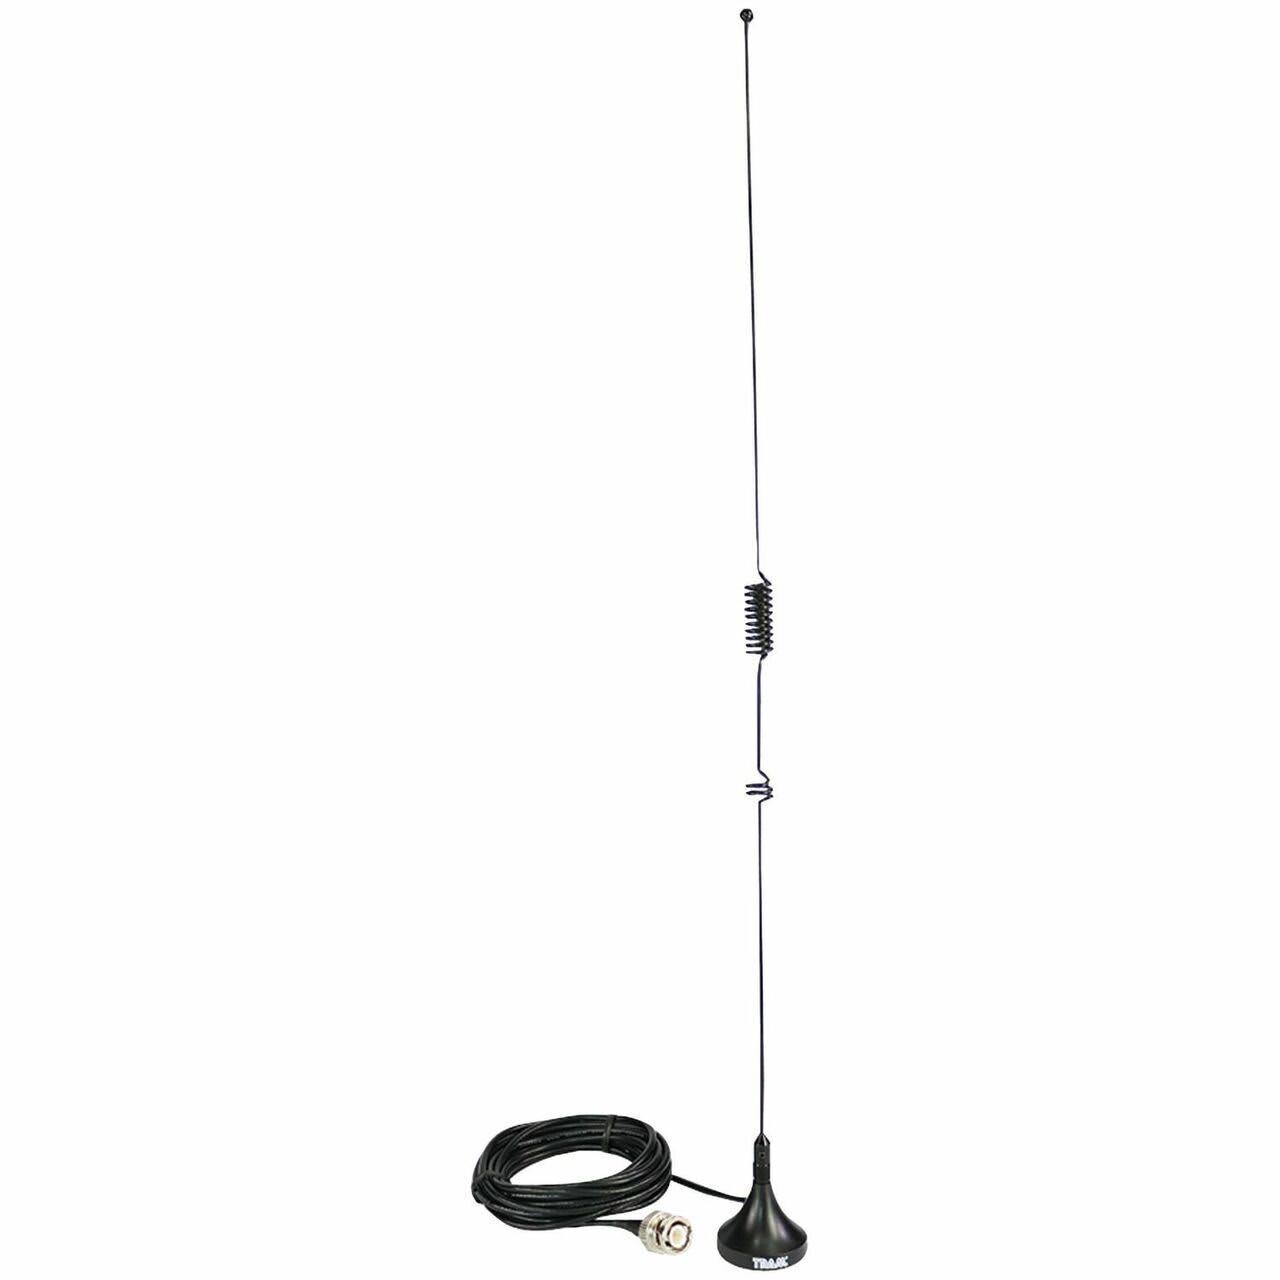 Tram 1089-BNC Scanner Mini-Magnet Antenna VHF/UHF/800MHz-1,300MHz With BNC-Male Connector